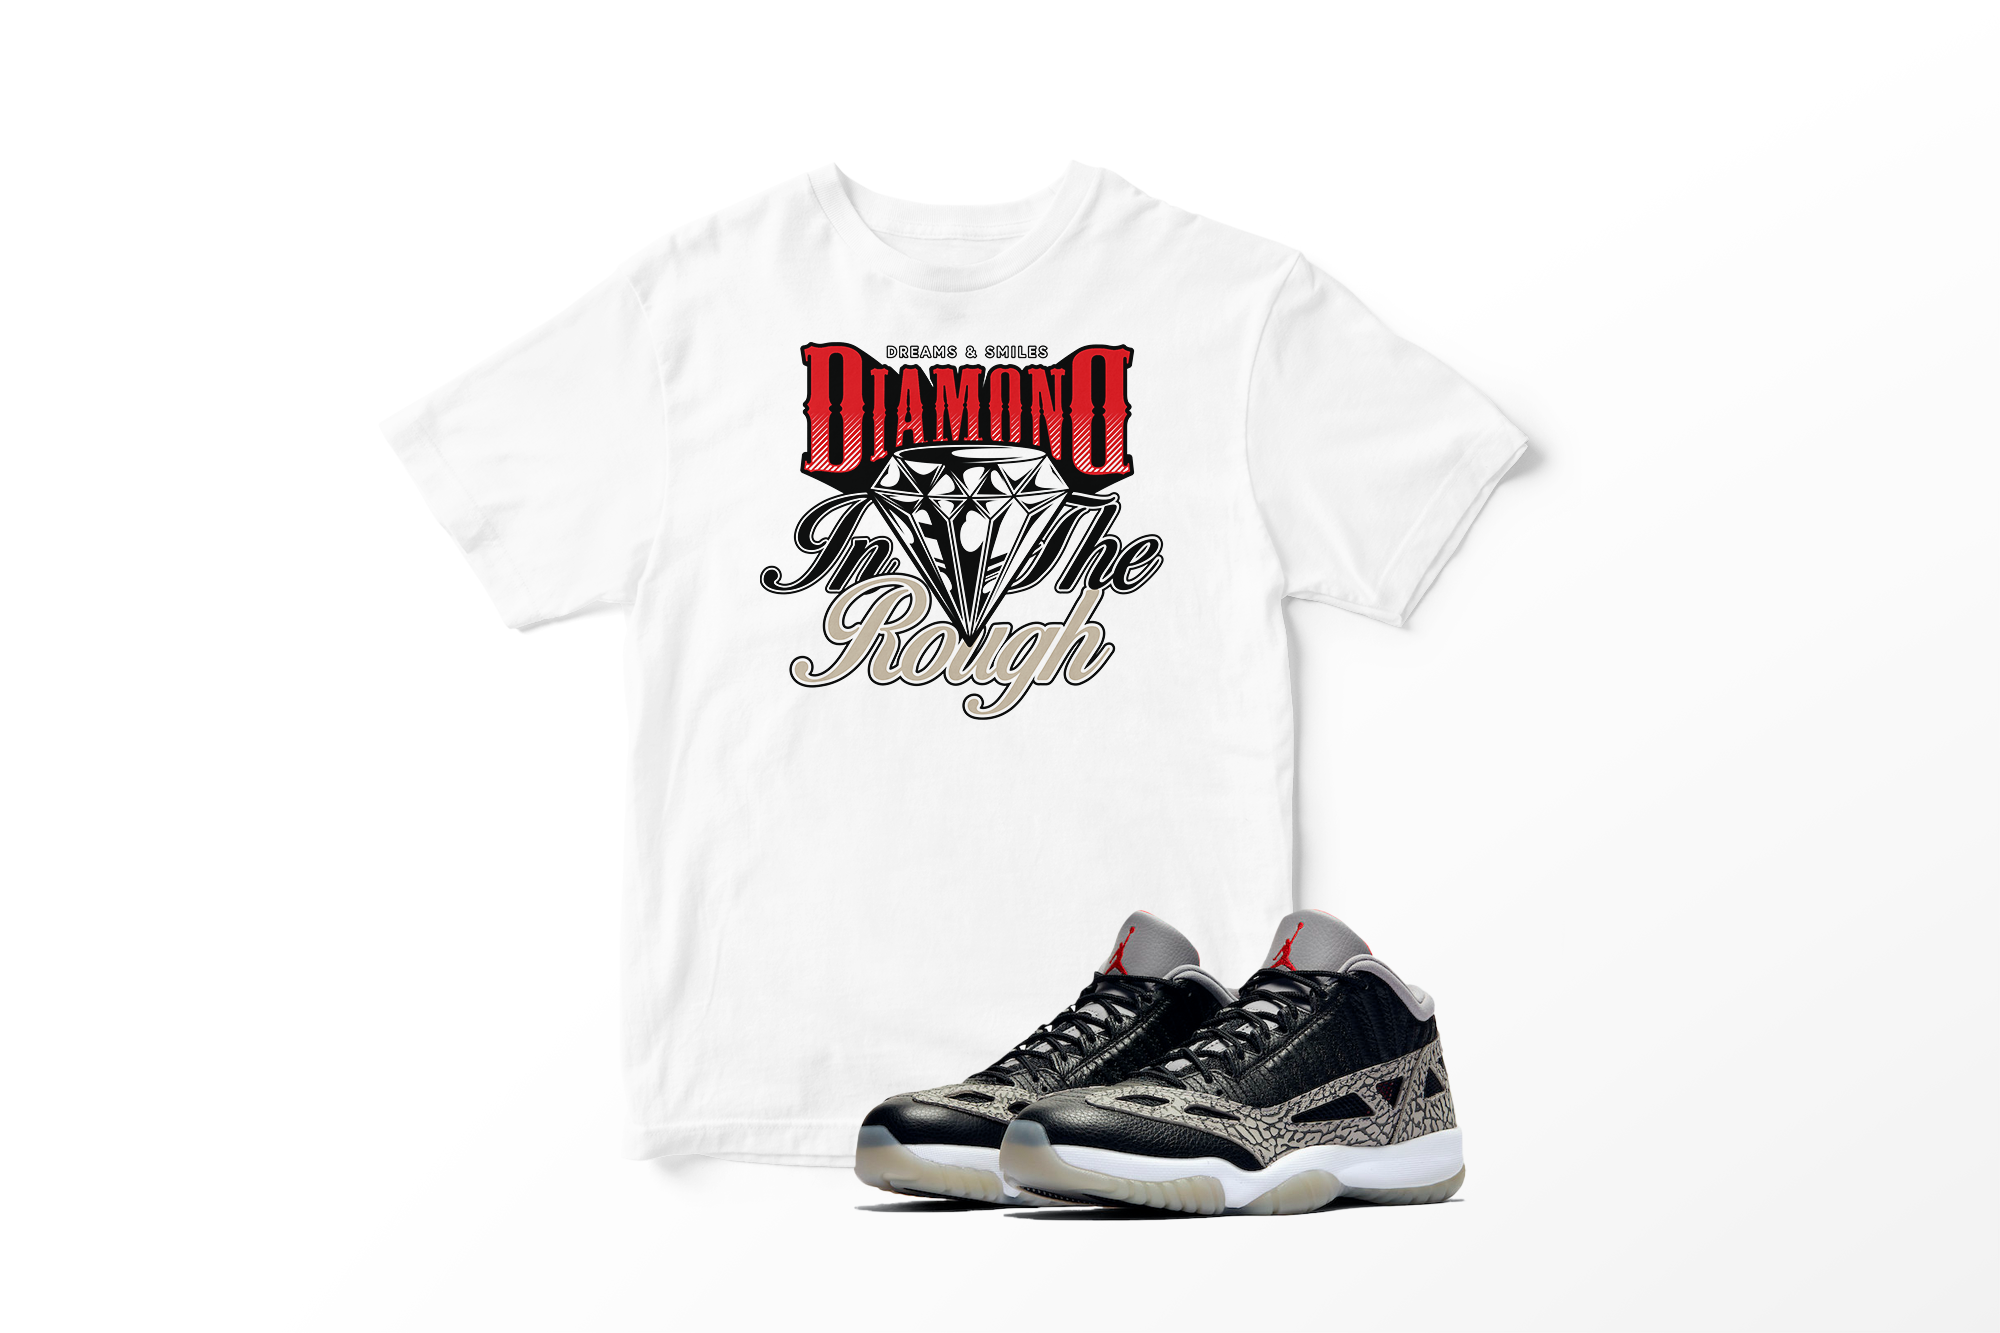 'Diamond In The Rough' in Black Cement CW Short Sleeve Tee